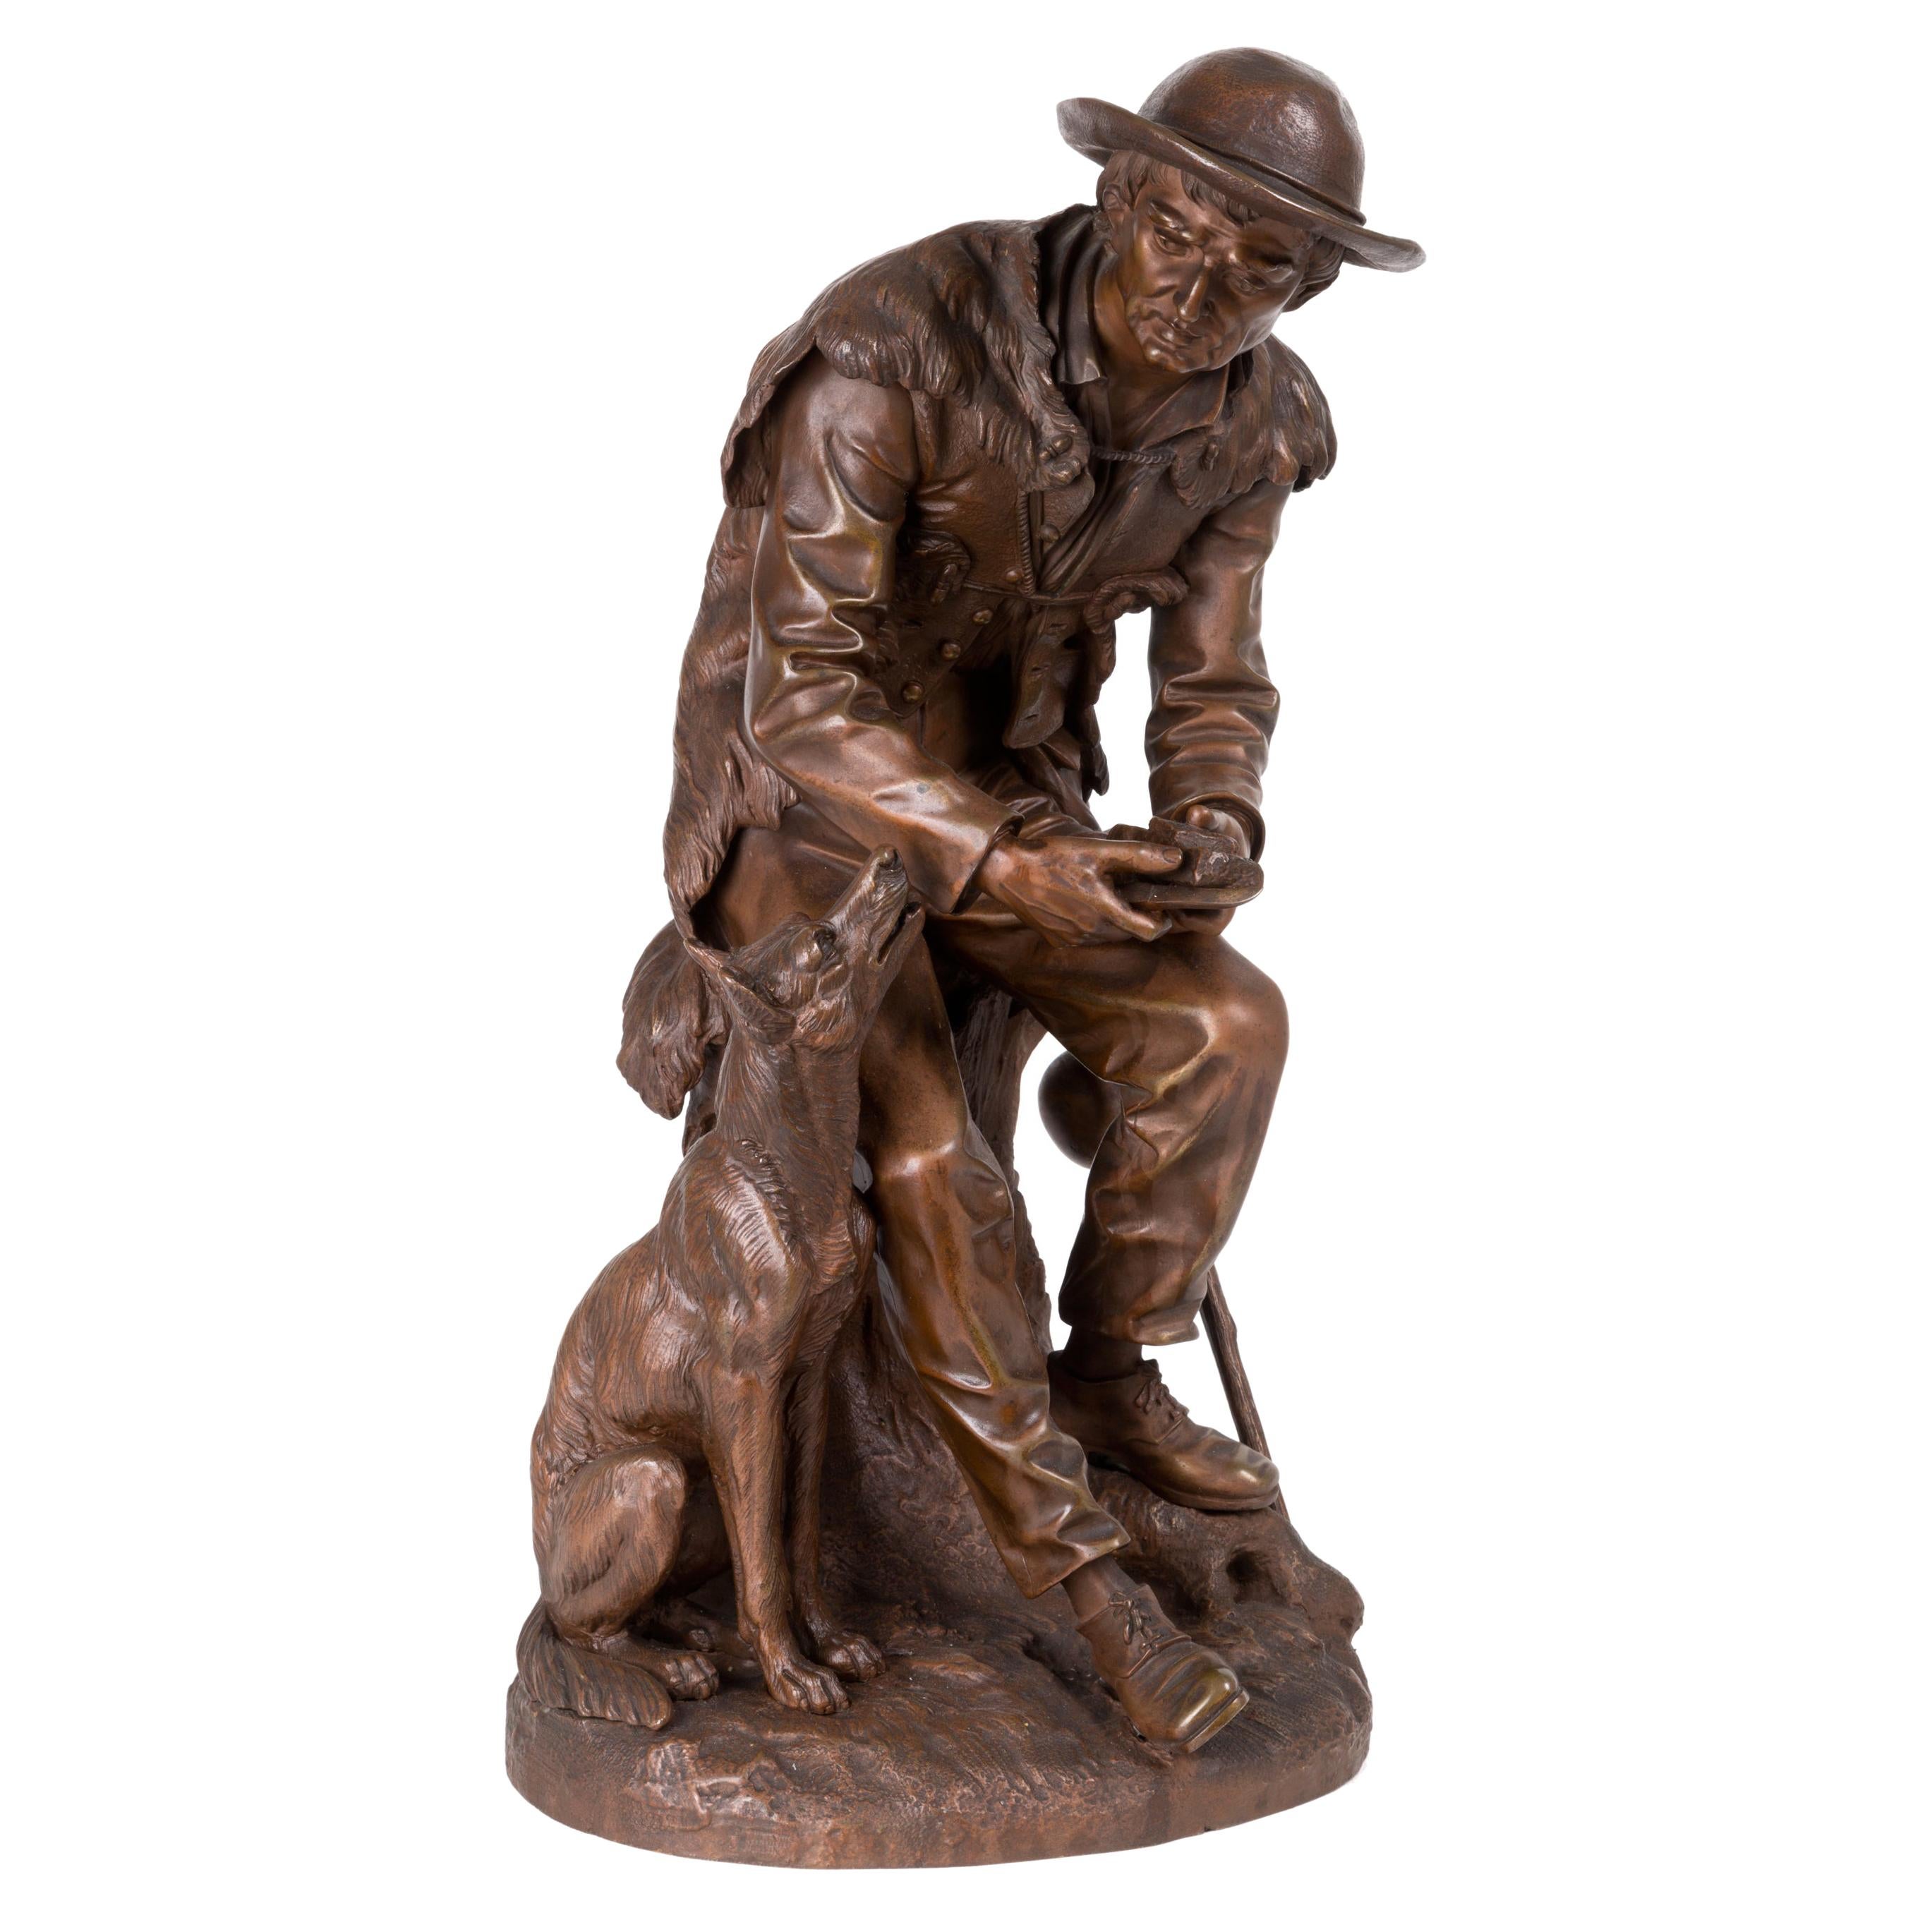 Anatole J. Guillot Bronze Sculpture Depicting "Seated woodcarver with dog"